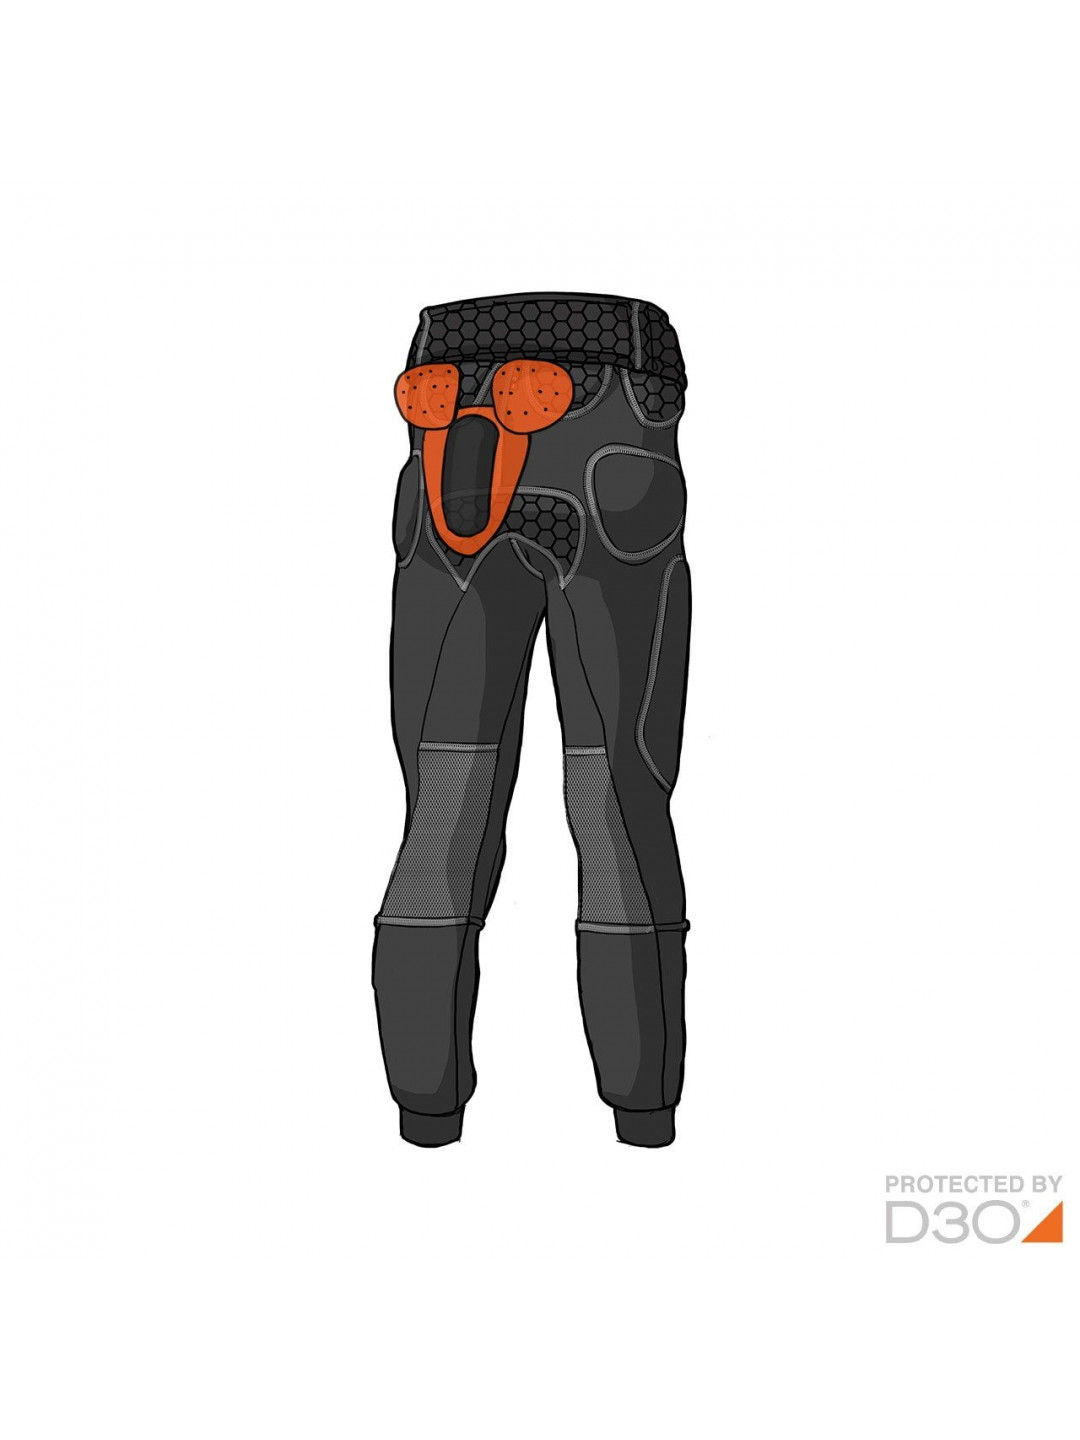 https://myewheel.com/image/cache/catalog/protective-gear/xion/pants-extreme-pro/pan-10110-back-sketched-1080x1440.jpg